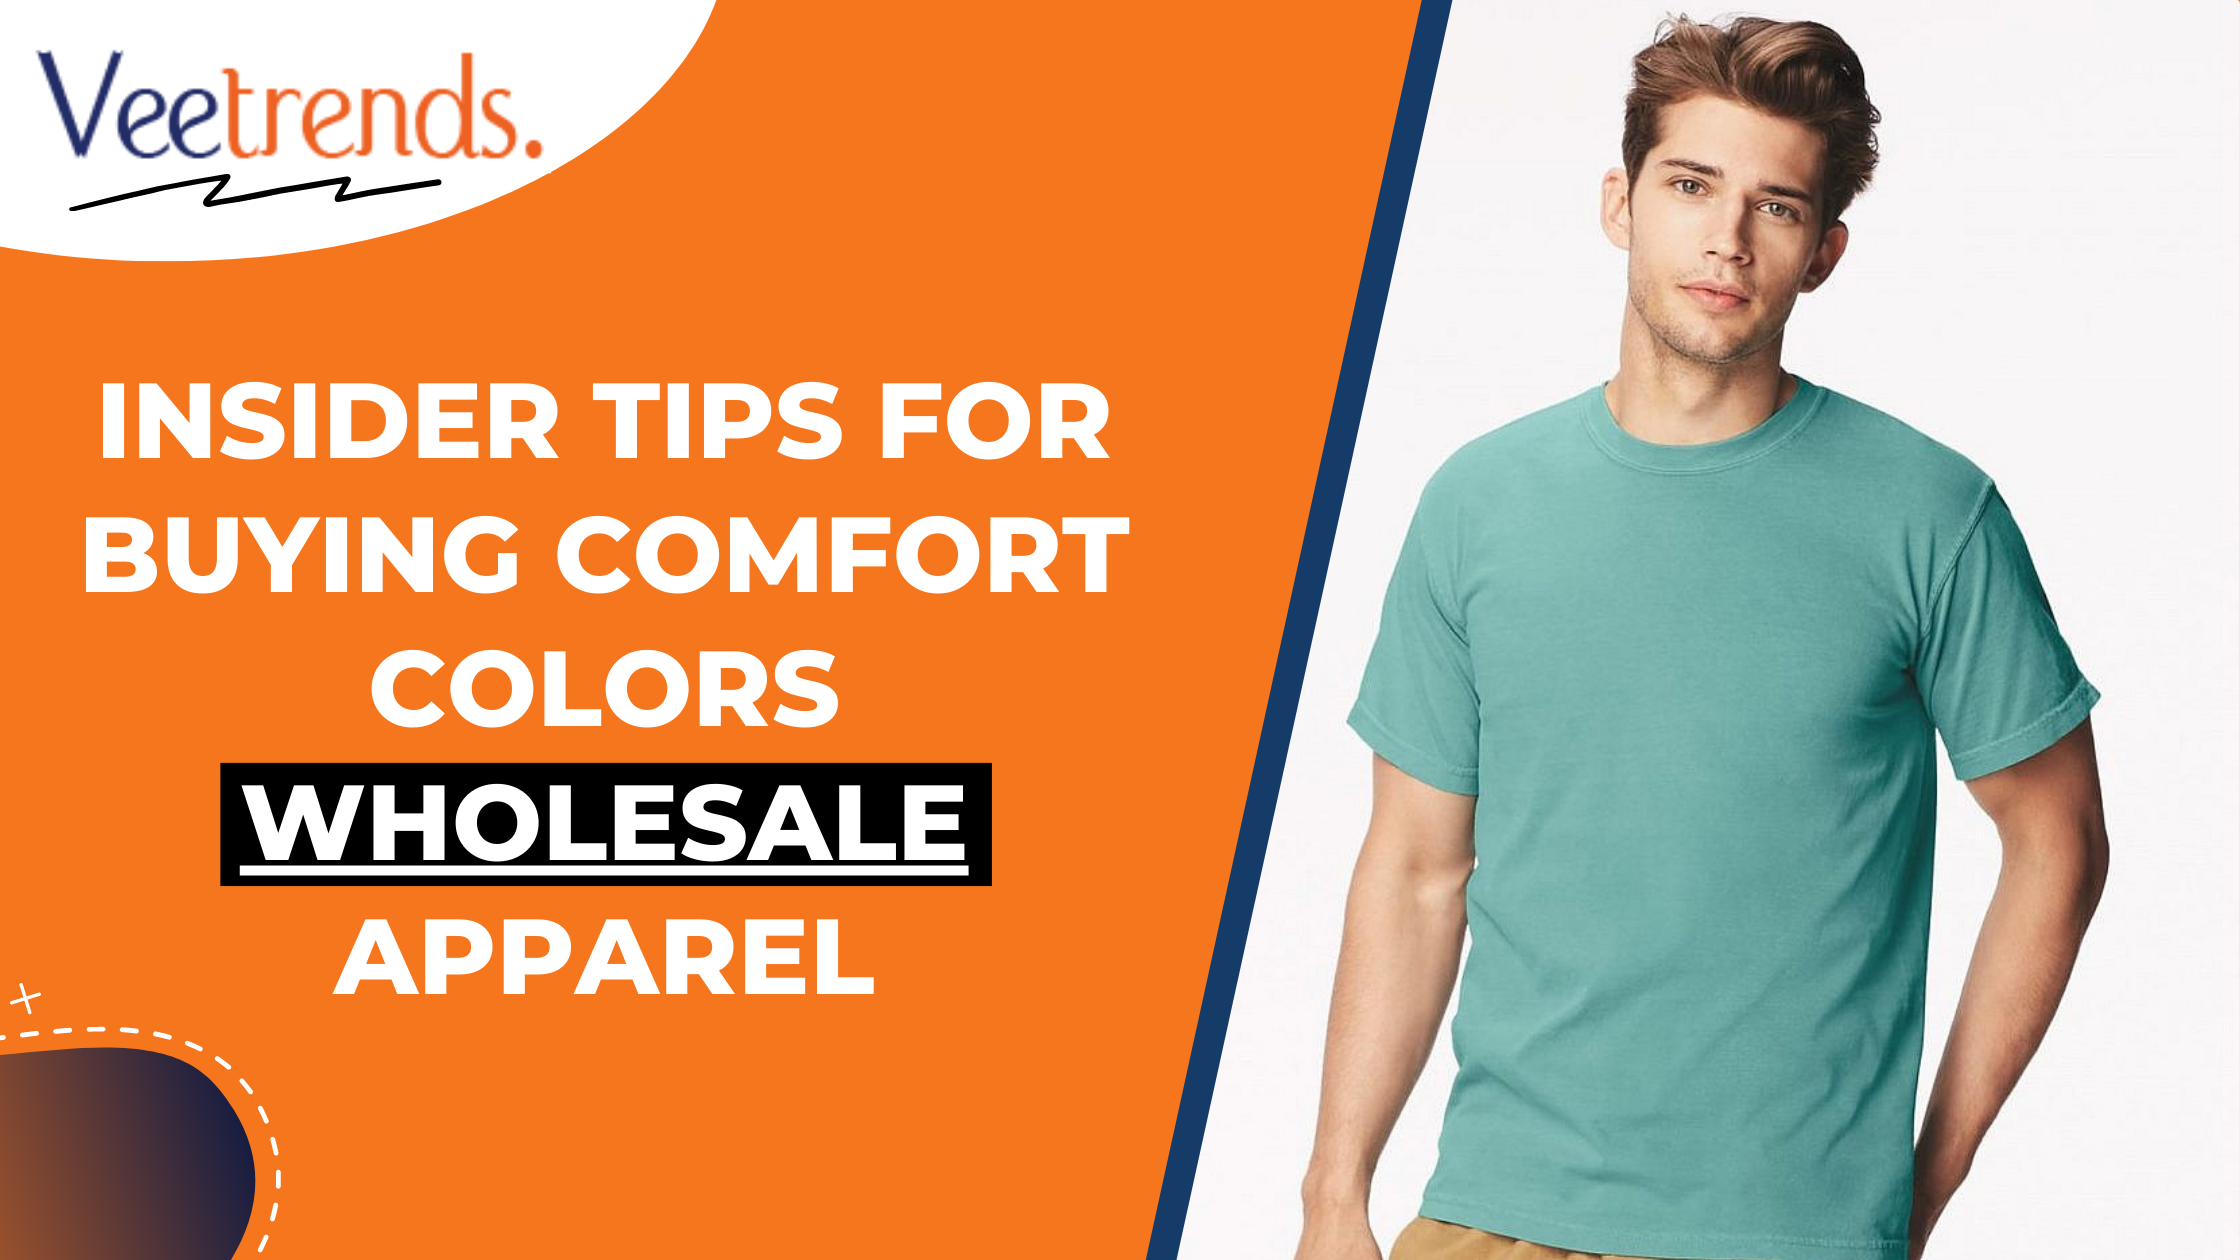 Insider Tips for Buying Comfort Colors Wholesale Apparel